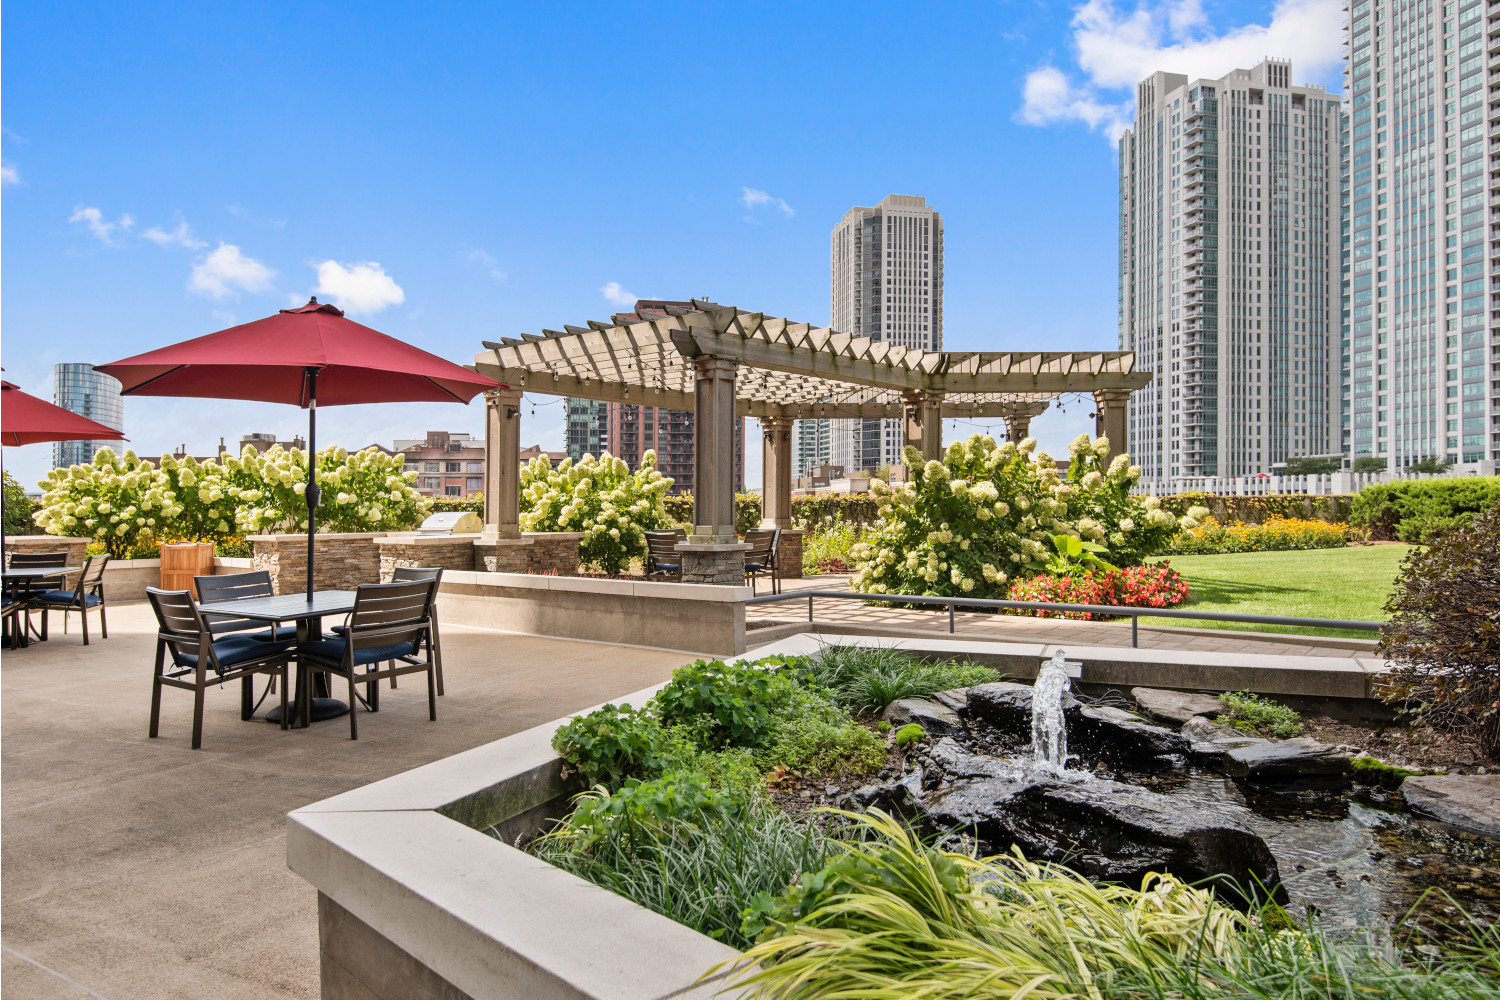 Left Bank : Spacious, landscaped outdoor terrace with lush seating, grills and a fire pit